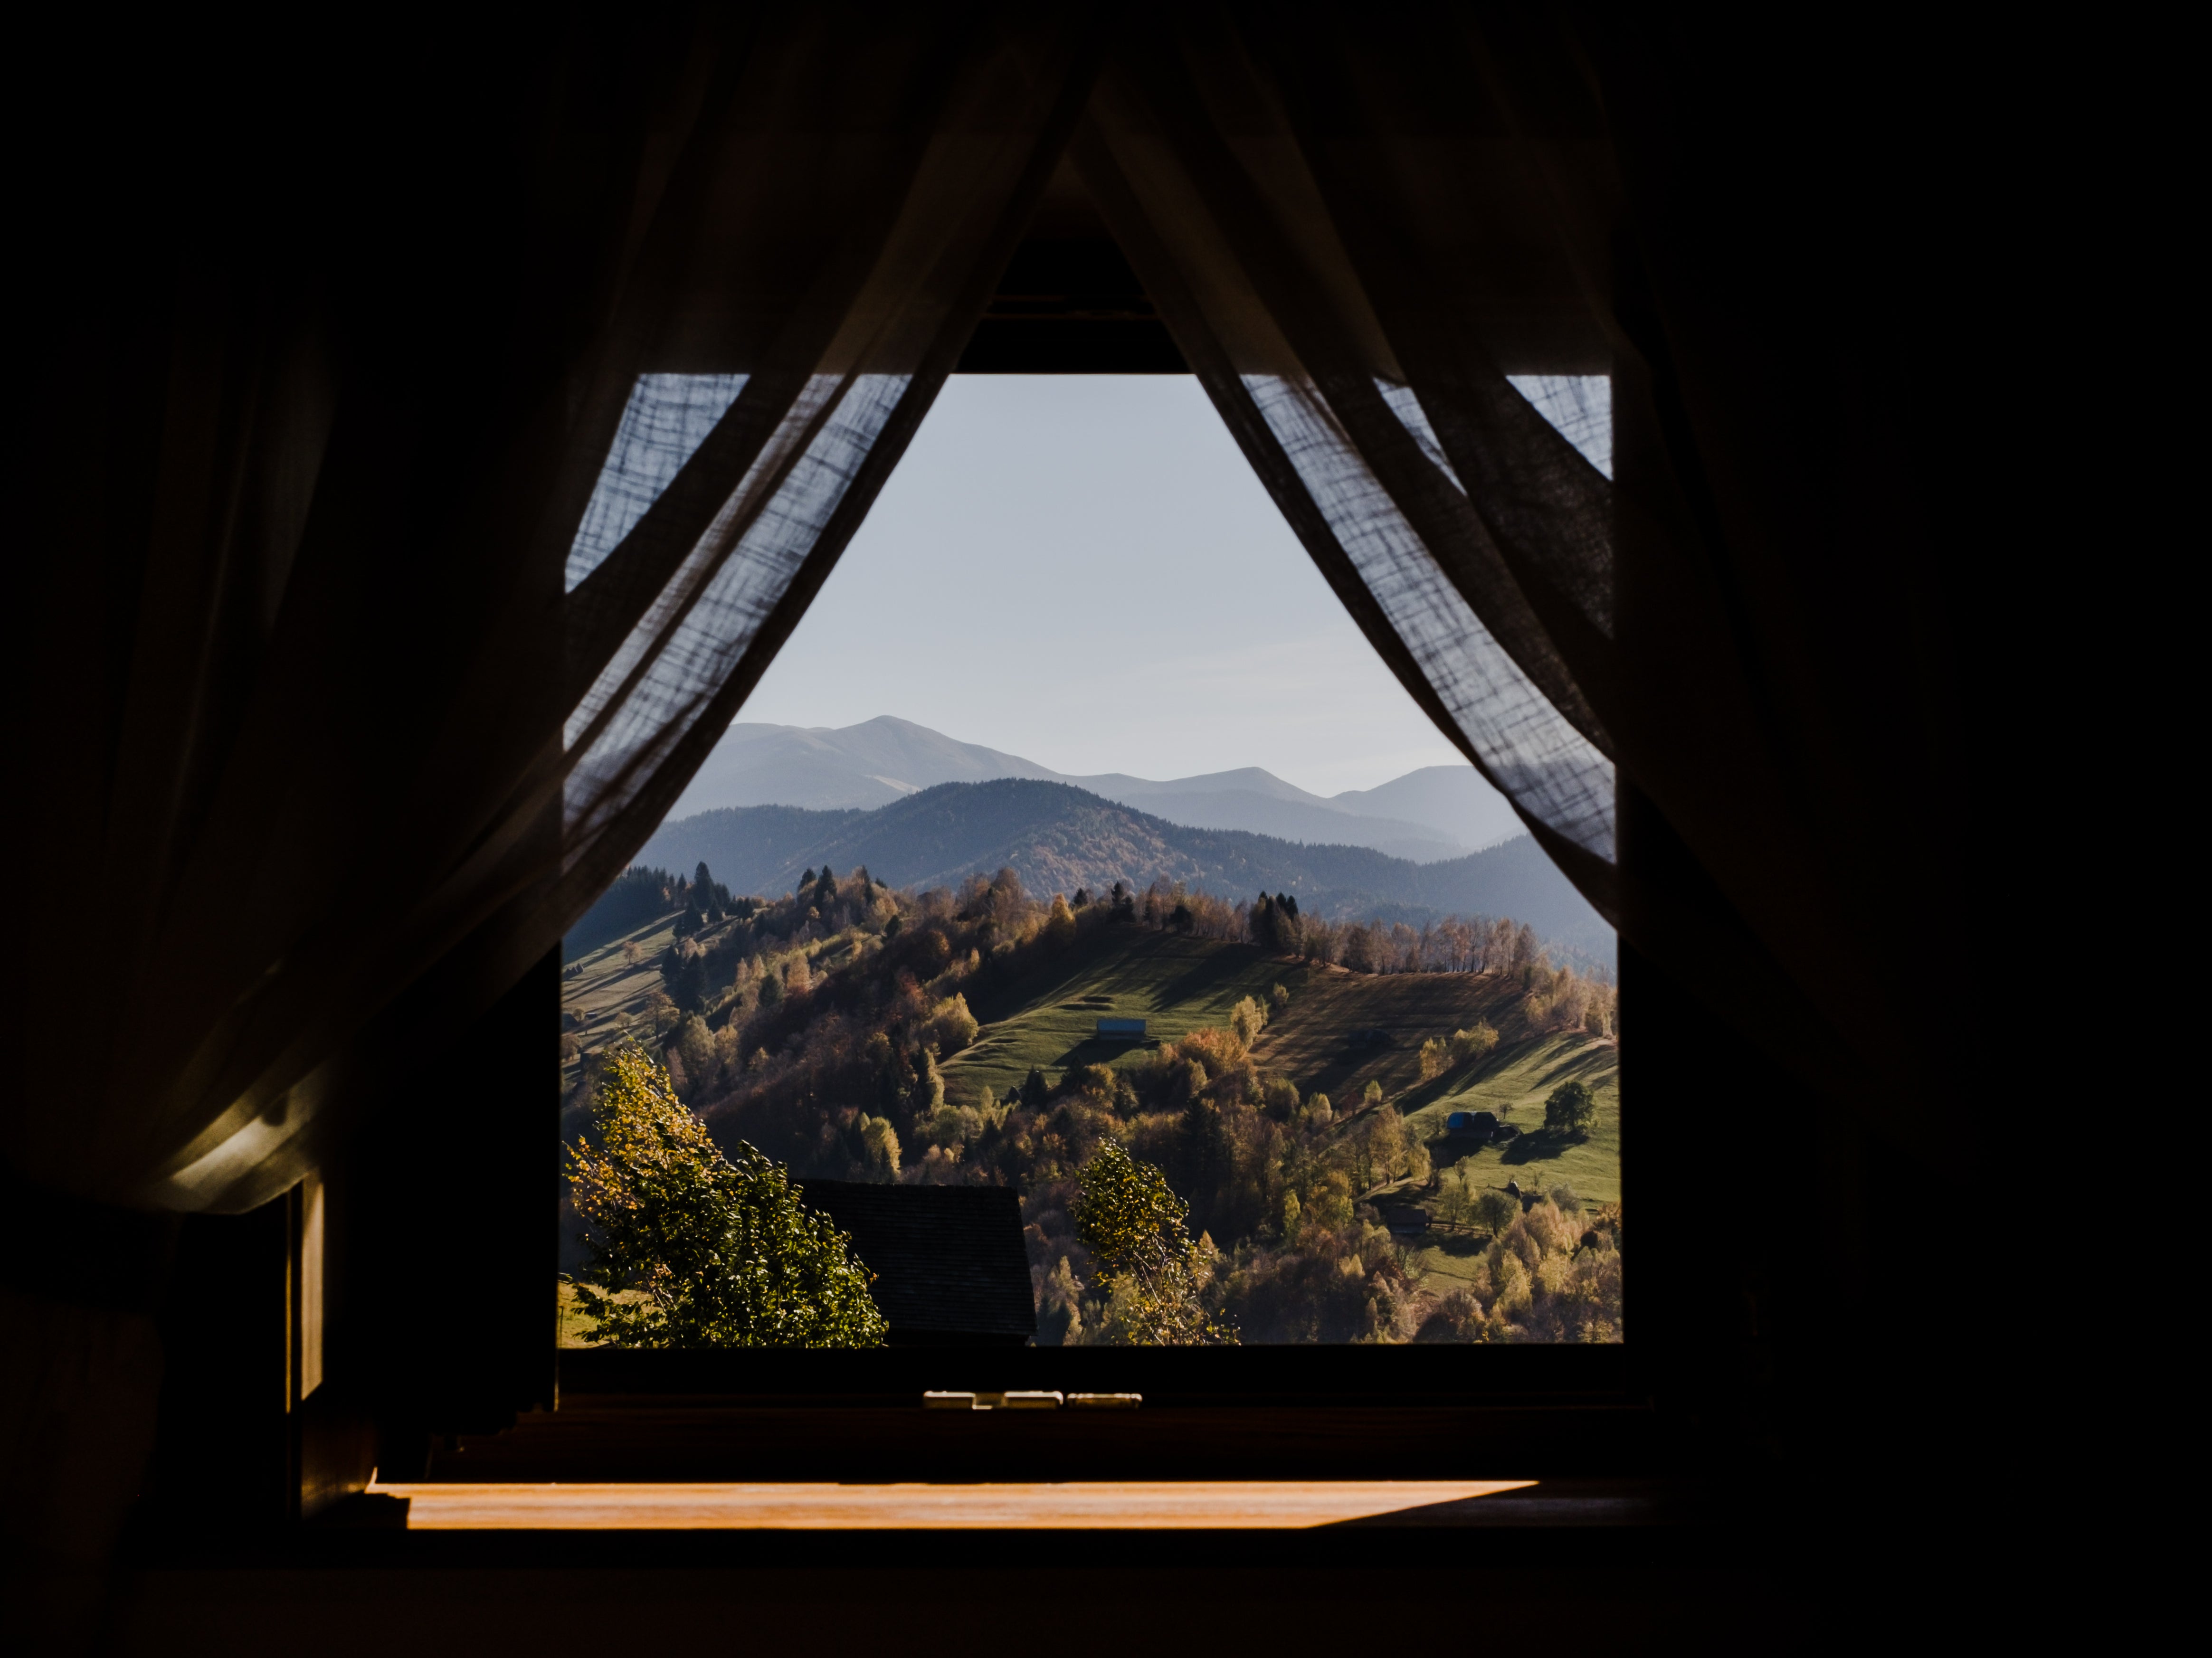 Matca Hotel has captivating views of the Romanian mountains